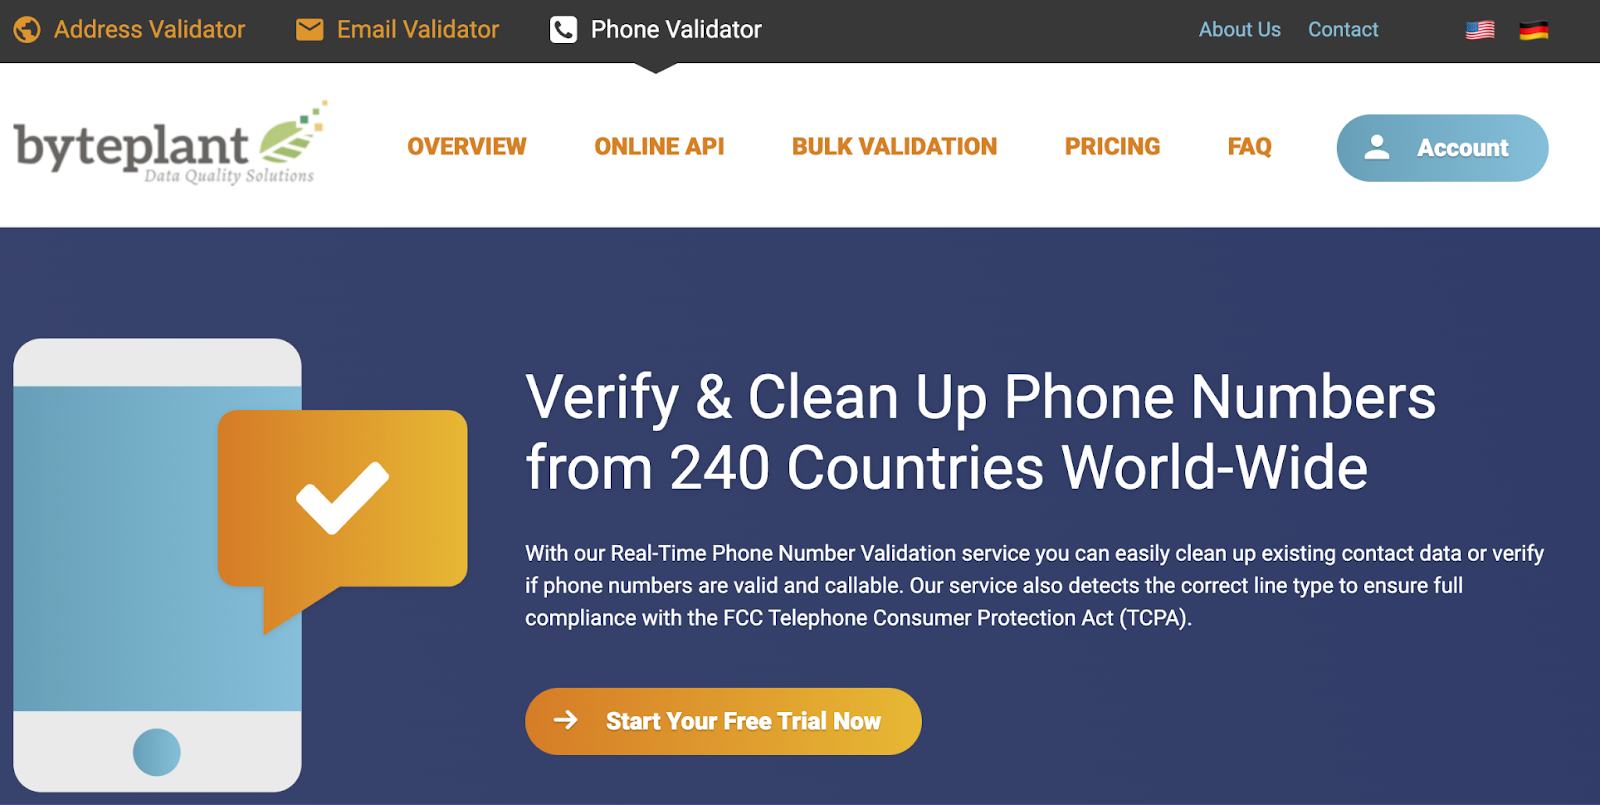 home page of the phone-validator phone validation service